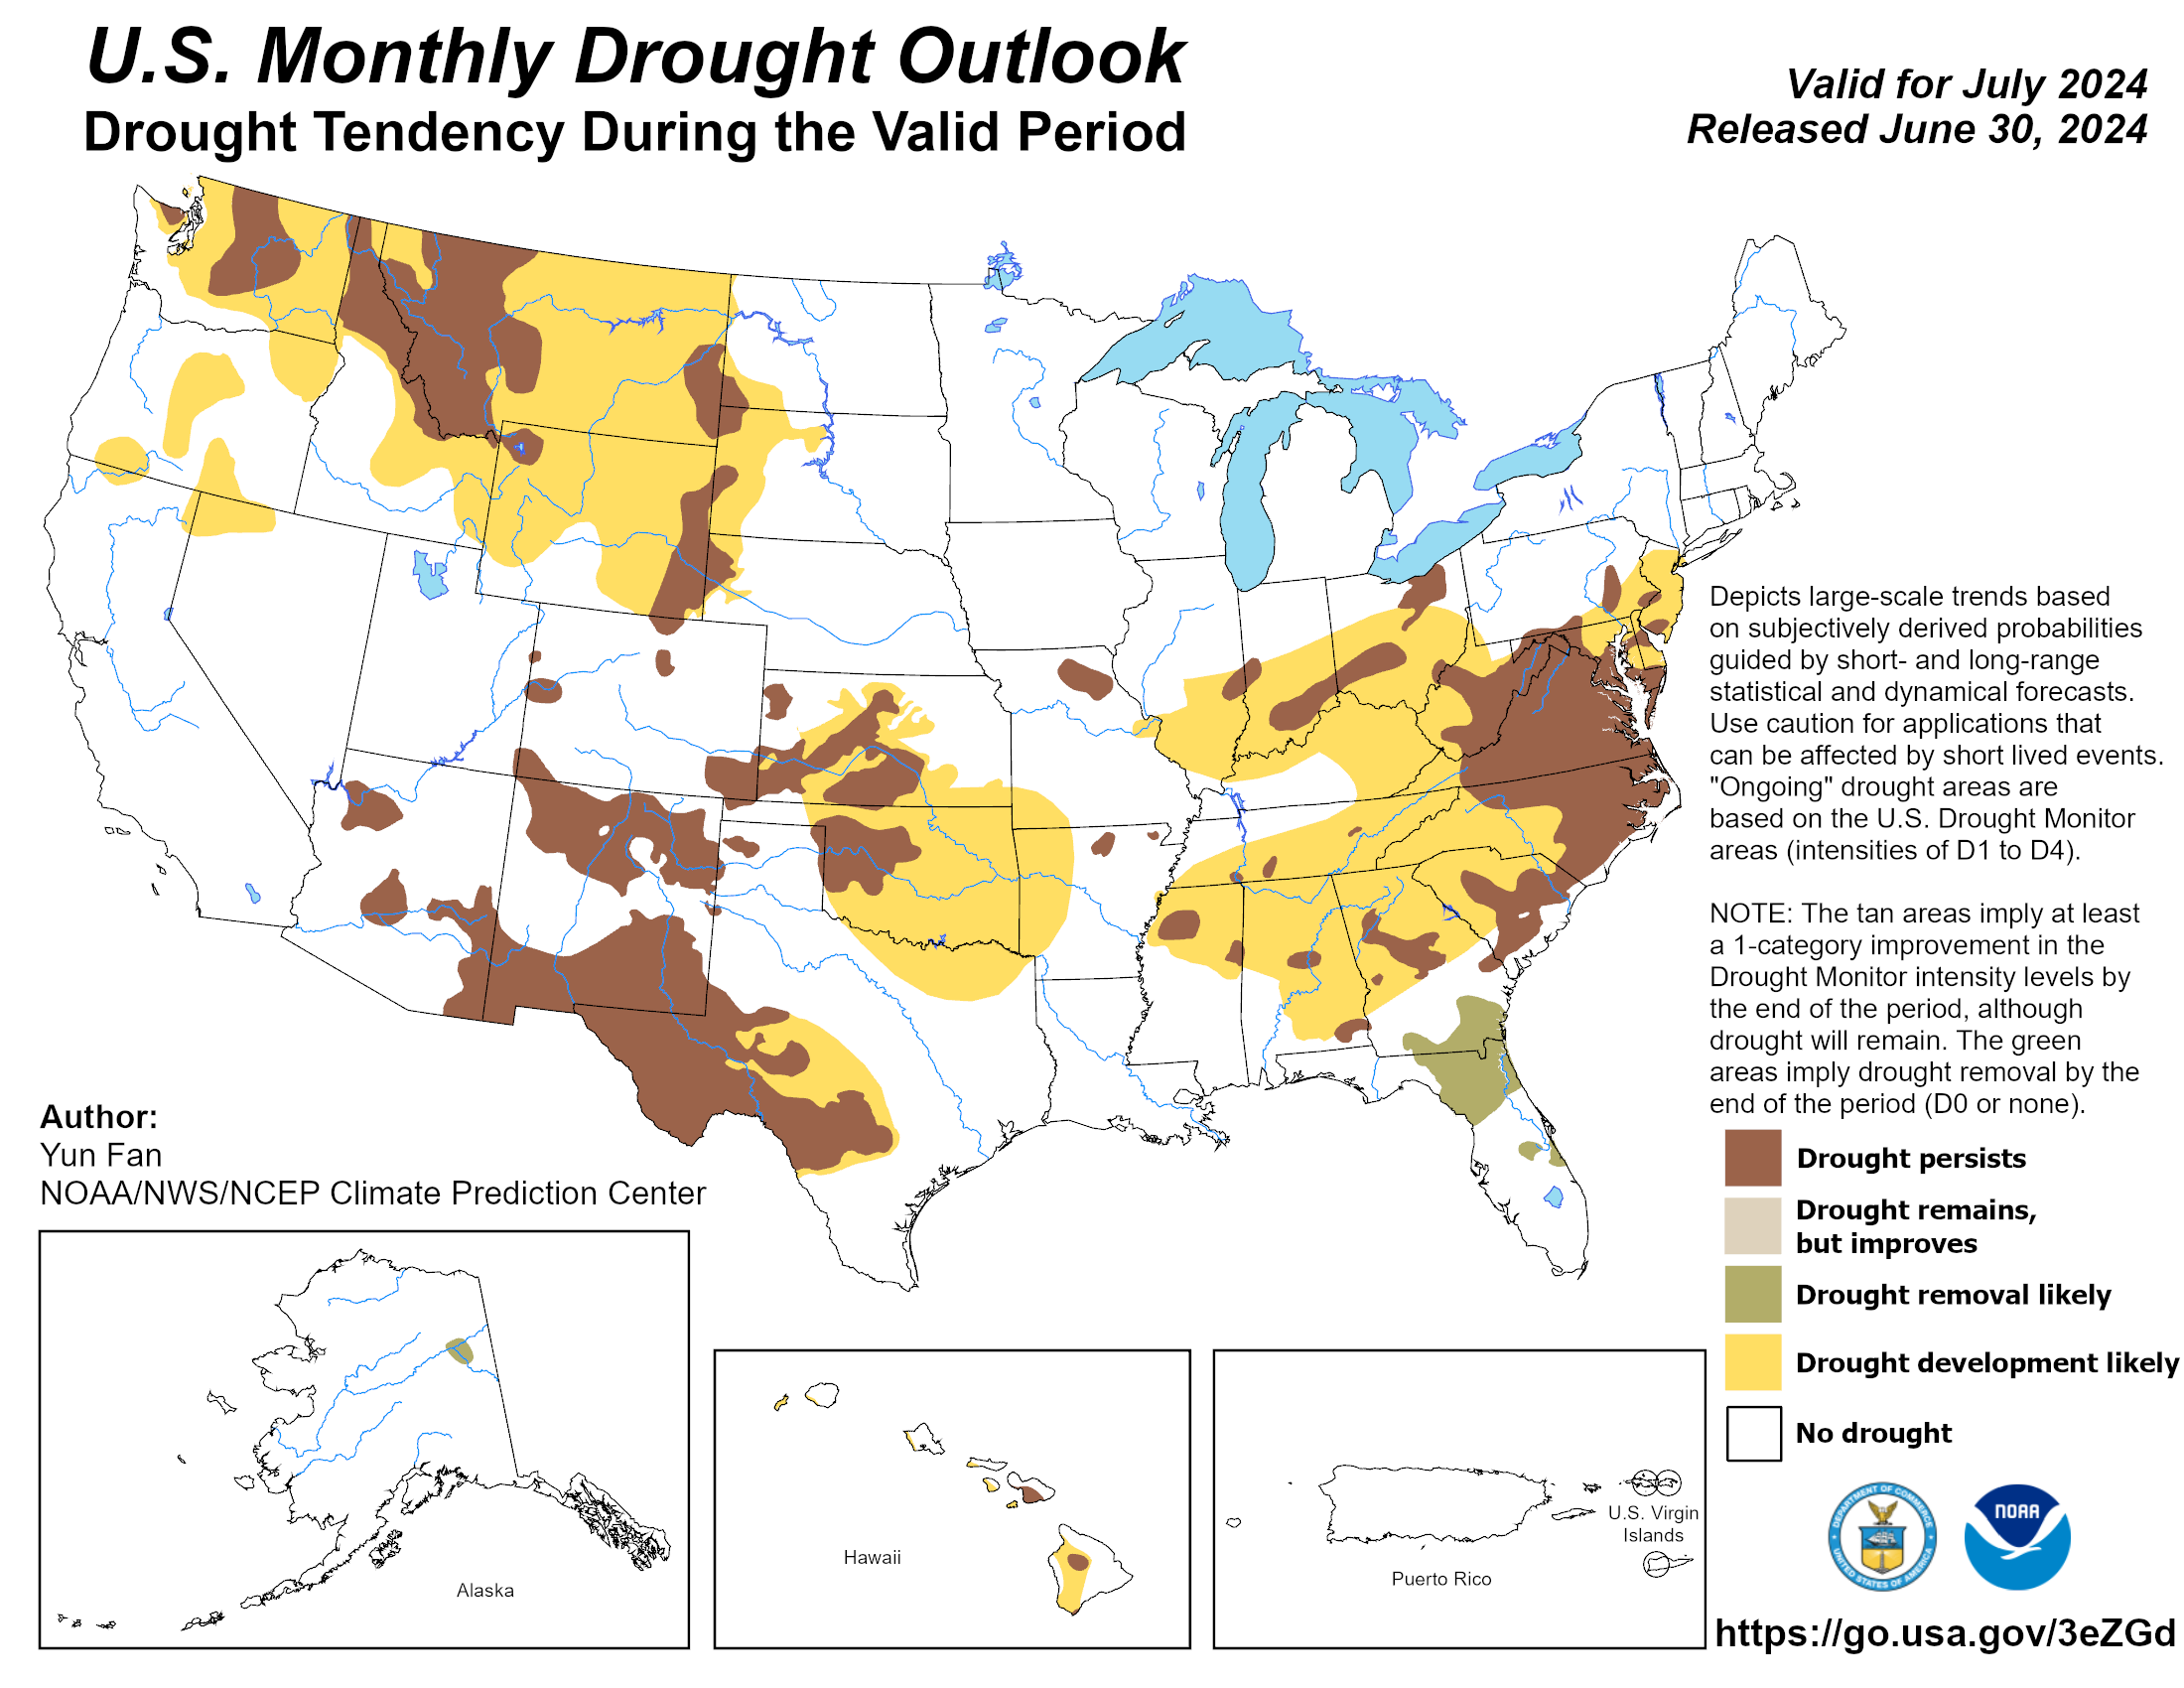 U.S. Monthly Drought Outlook displays the probability of drought development or improvement. Outlook is updated monthly at the beginning of each month.